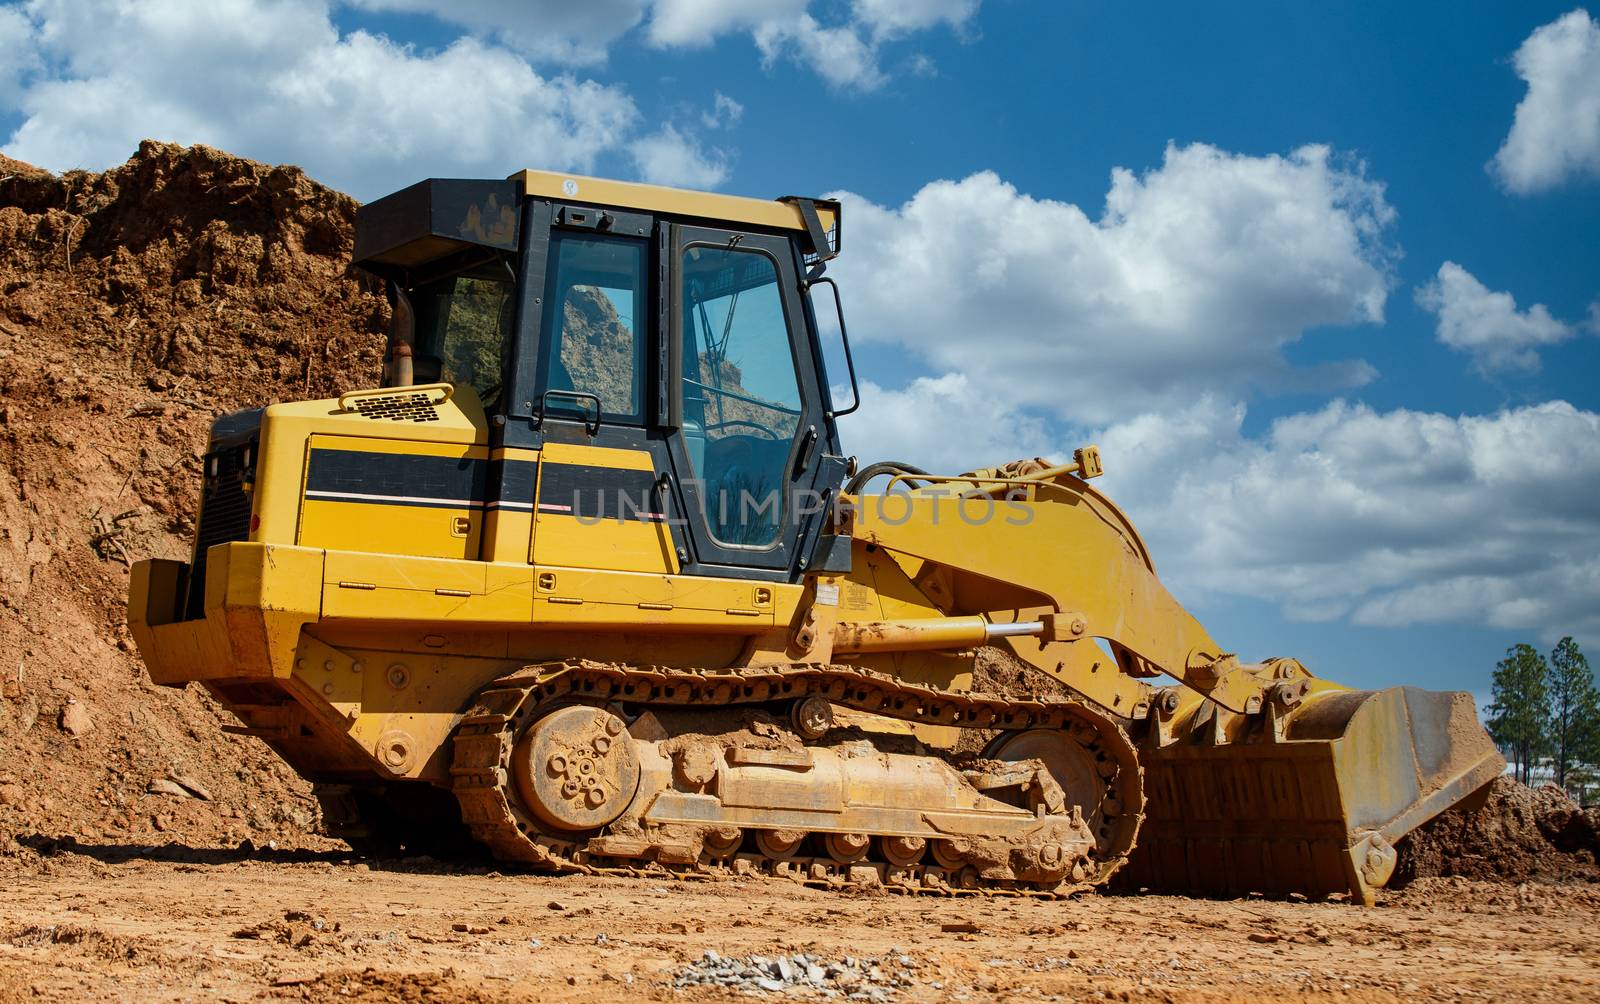 Earth Mover by Pile of Dirt by dbvirago